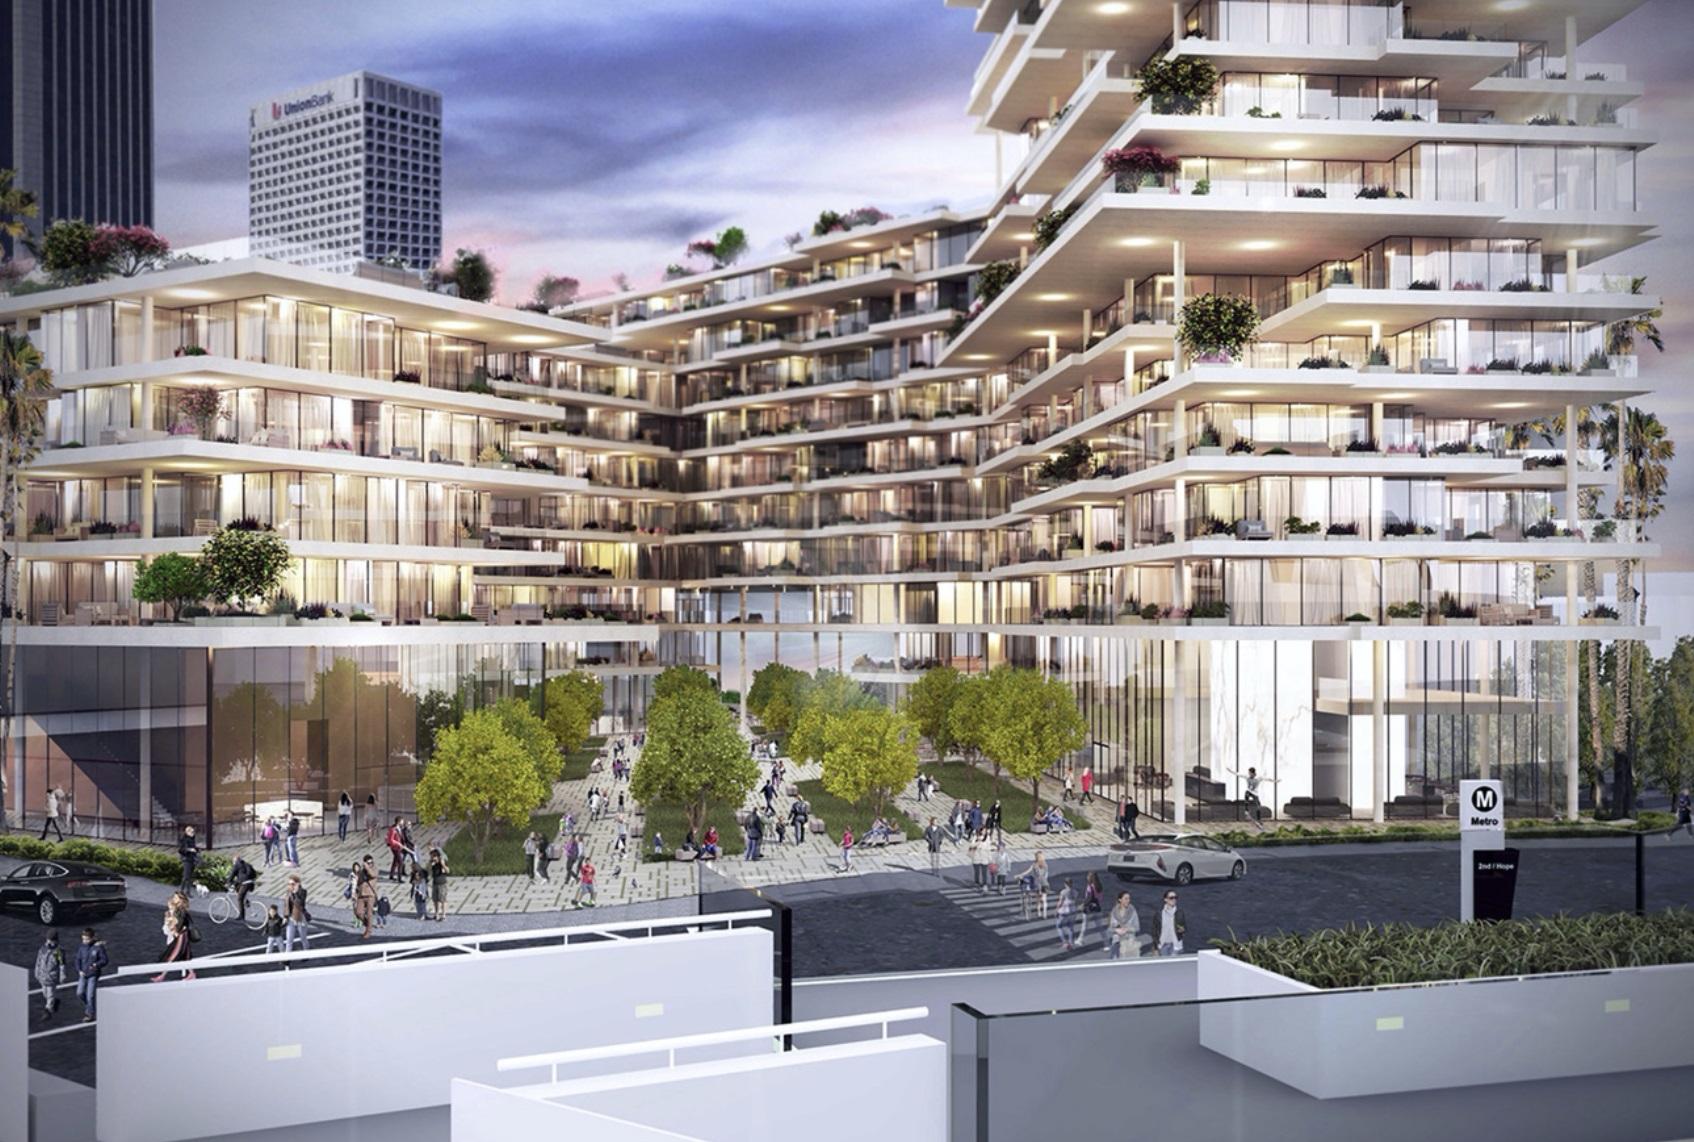 First glimpse of proposed high-rise above Regional Connectors Grand Av  Arts/Bunker HIll Station